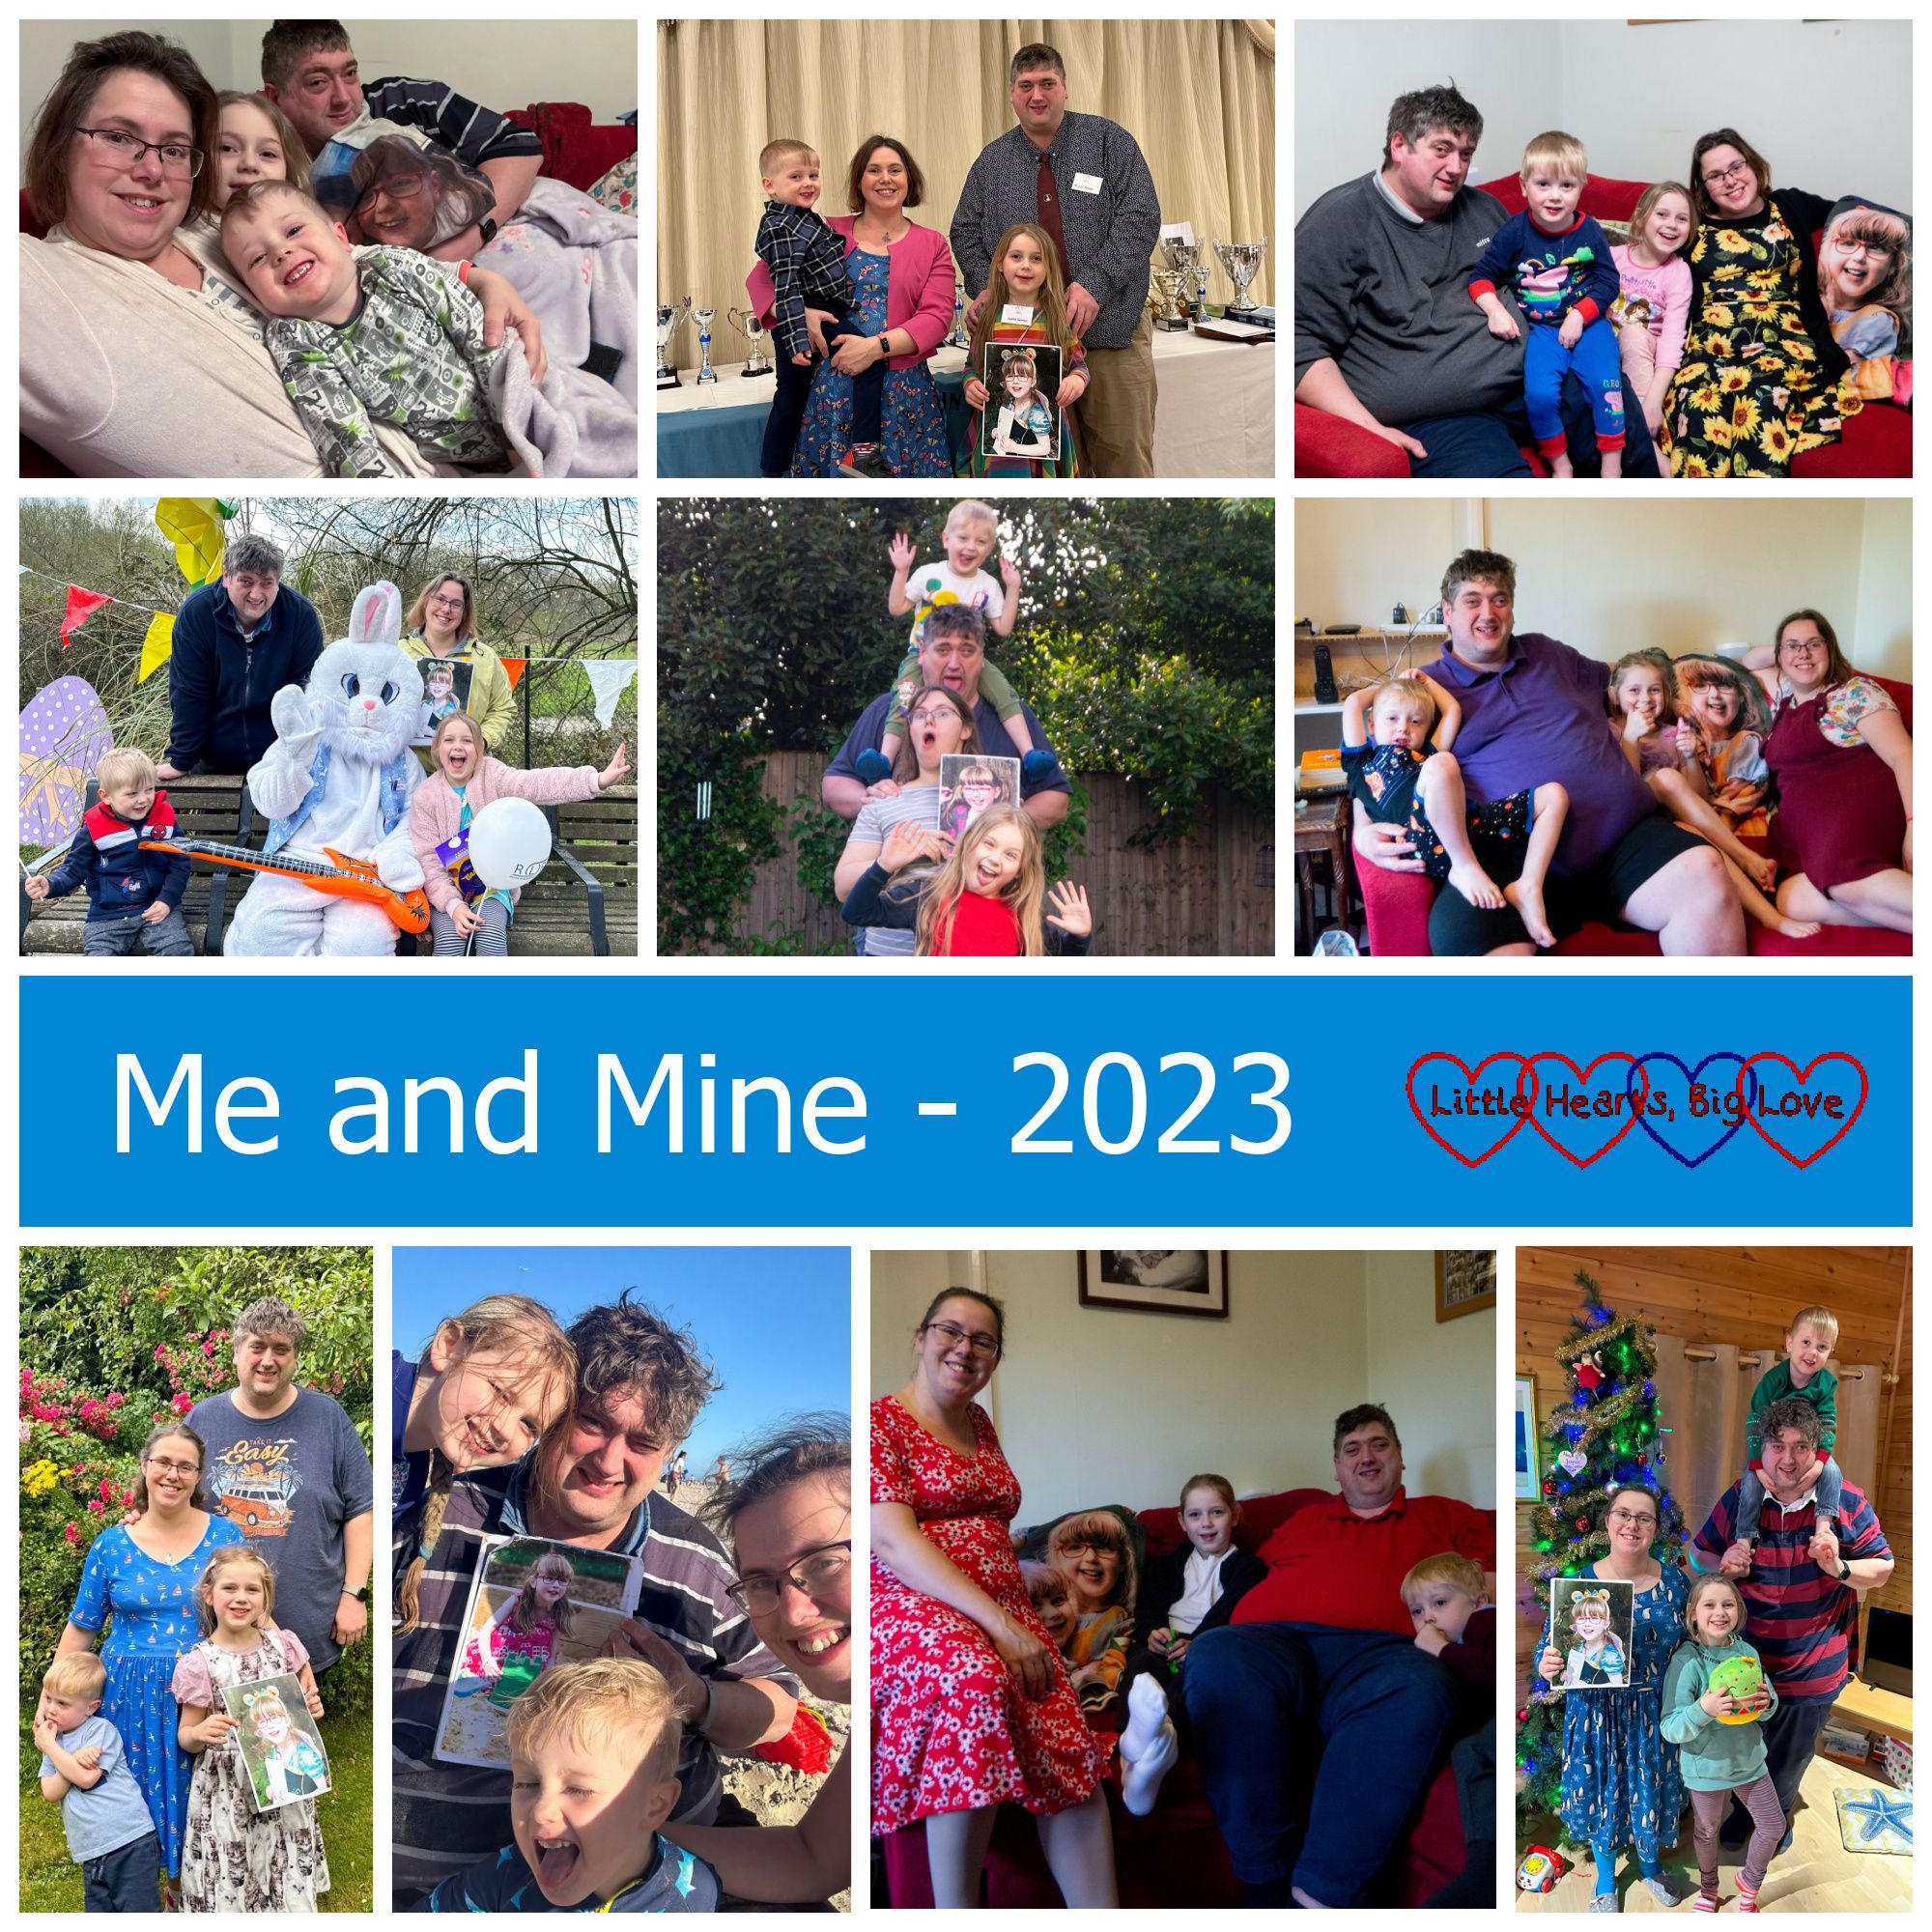 A selection of family photos taken throughout the year - "Me and Mine - 2023"